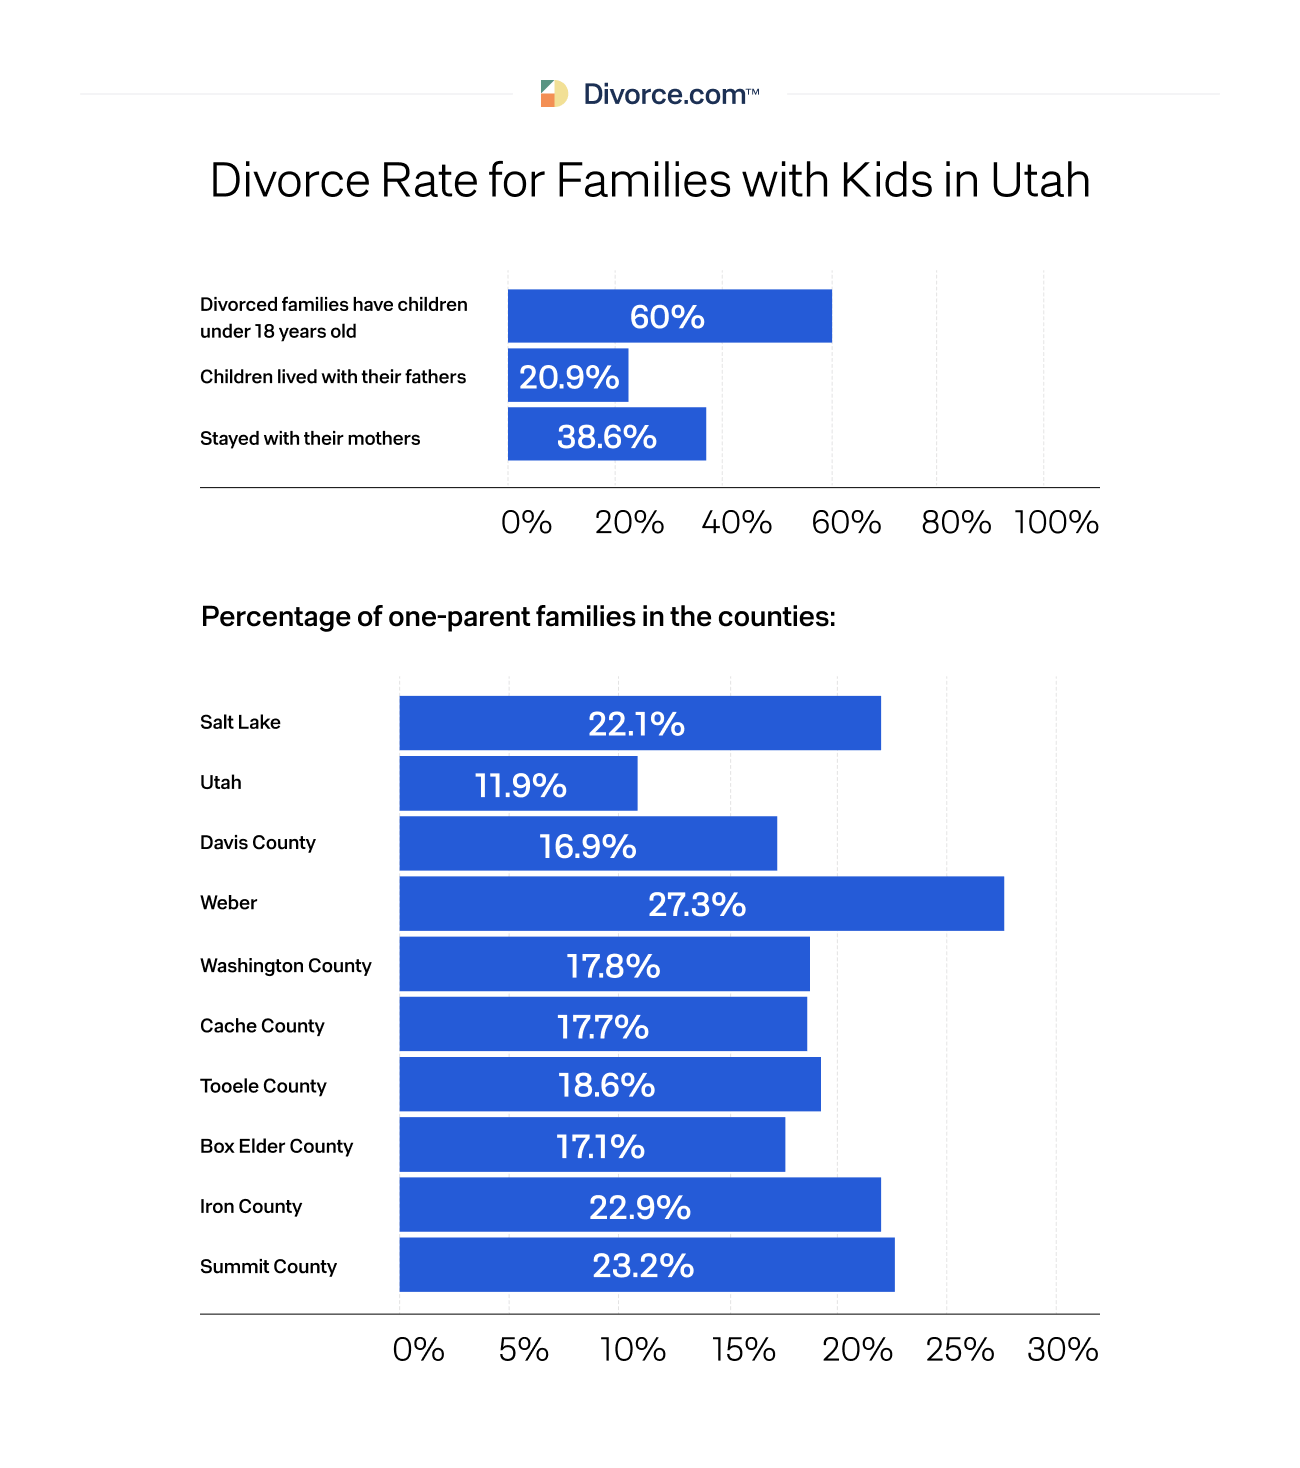 Divorce Rate for Families With Kids in Utah